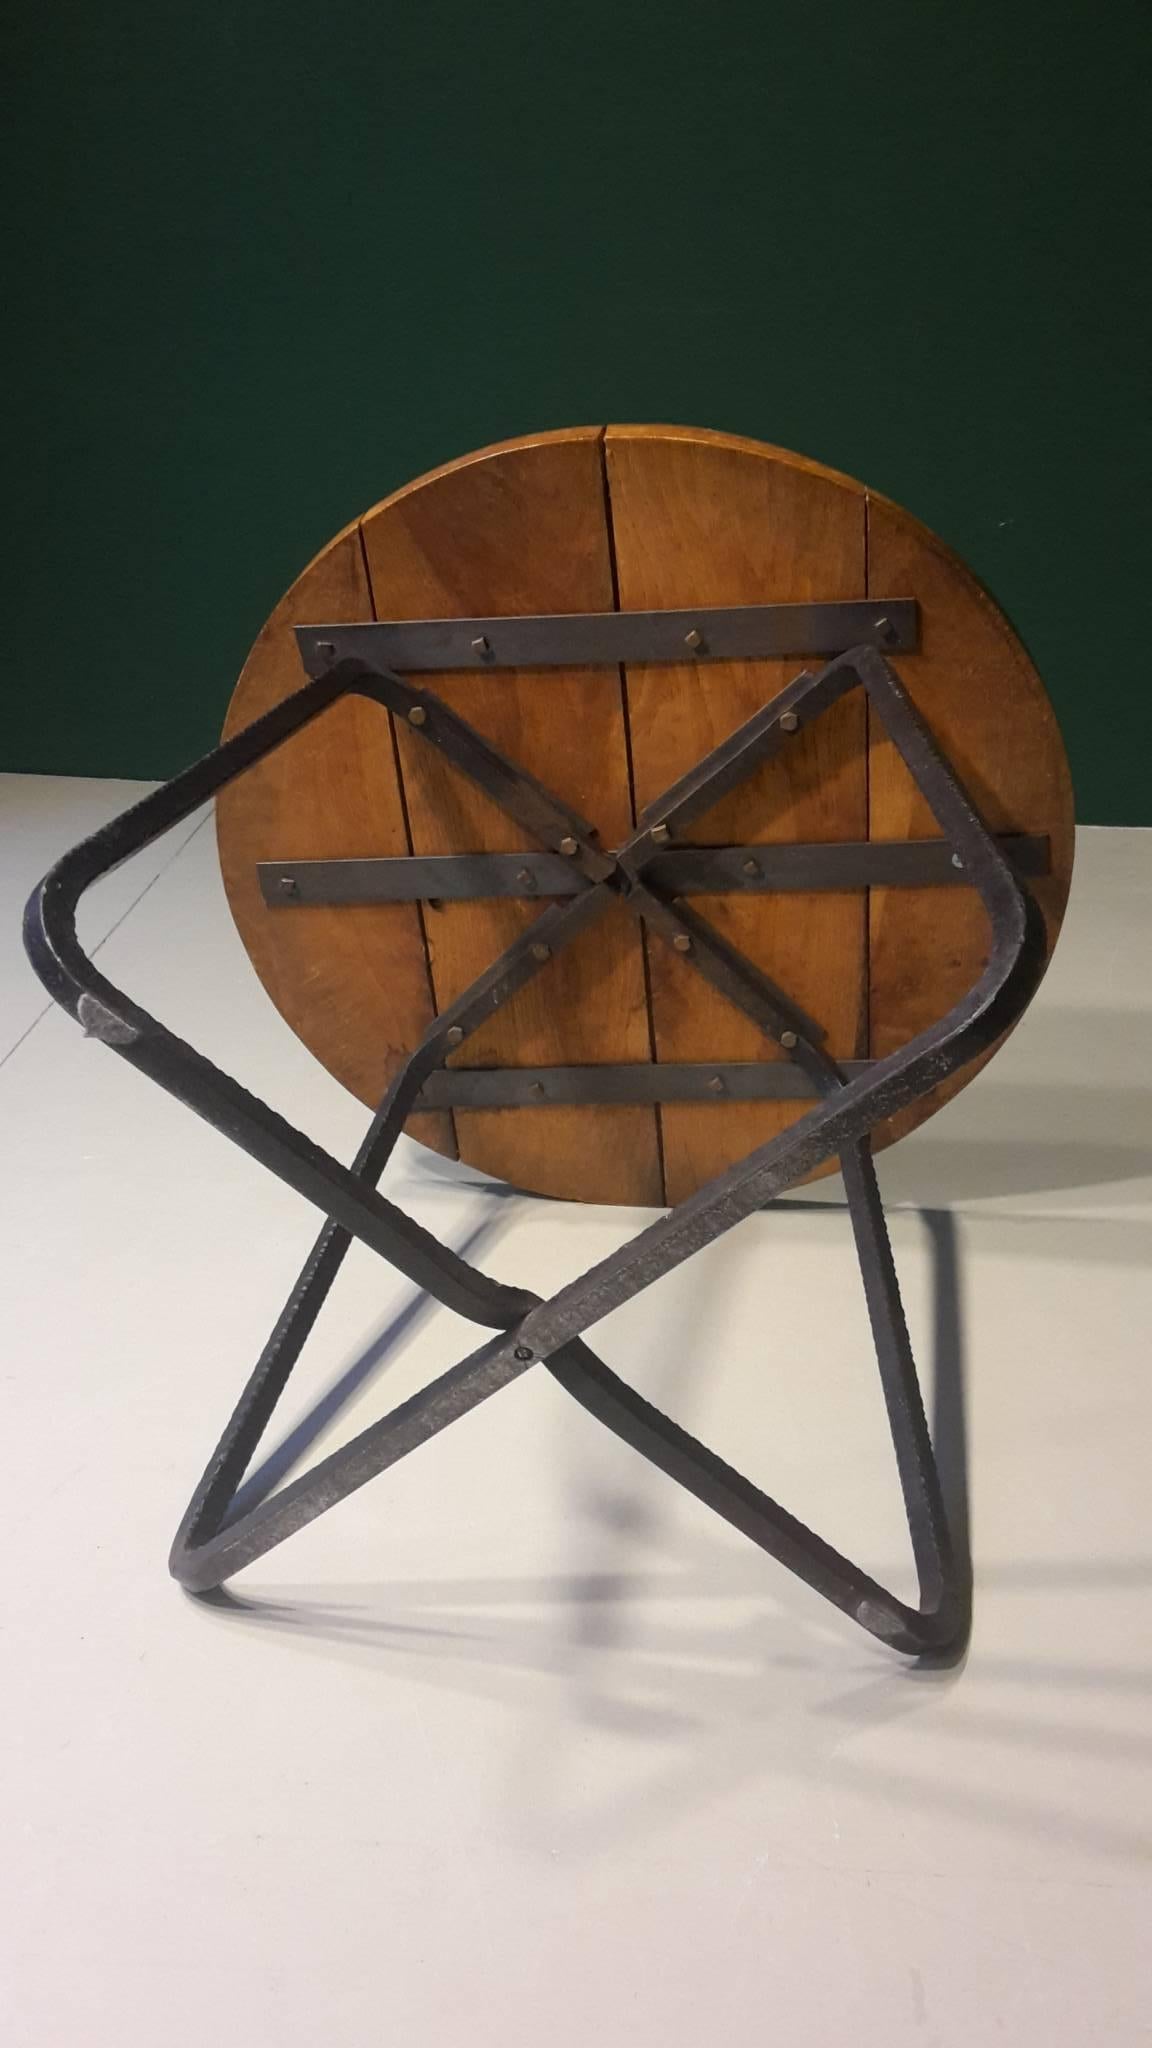 20th Century French Coffee Table Made of Walnut and Wrought Iron, 1960s For Sale 1